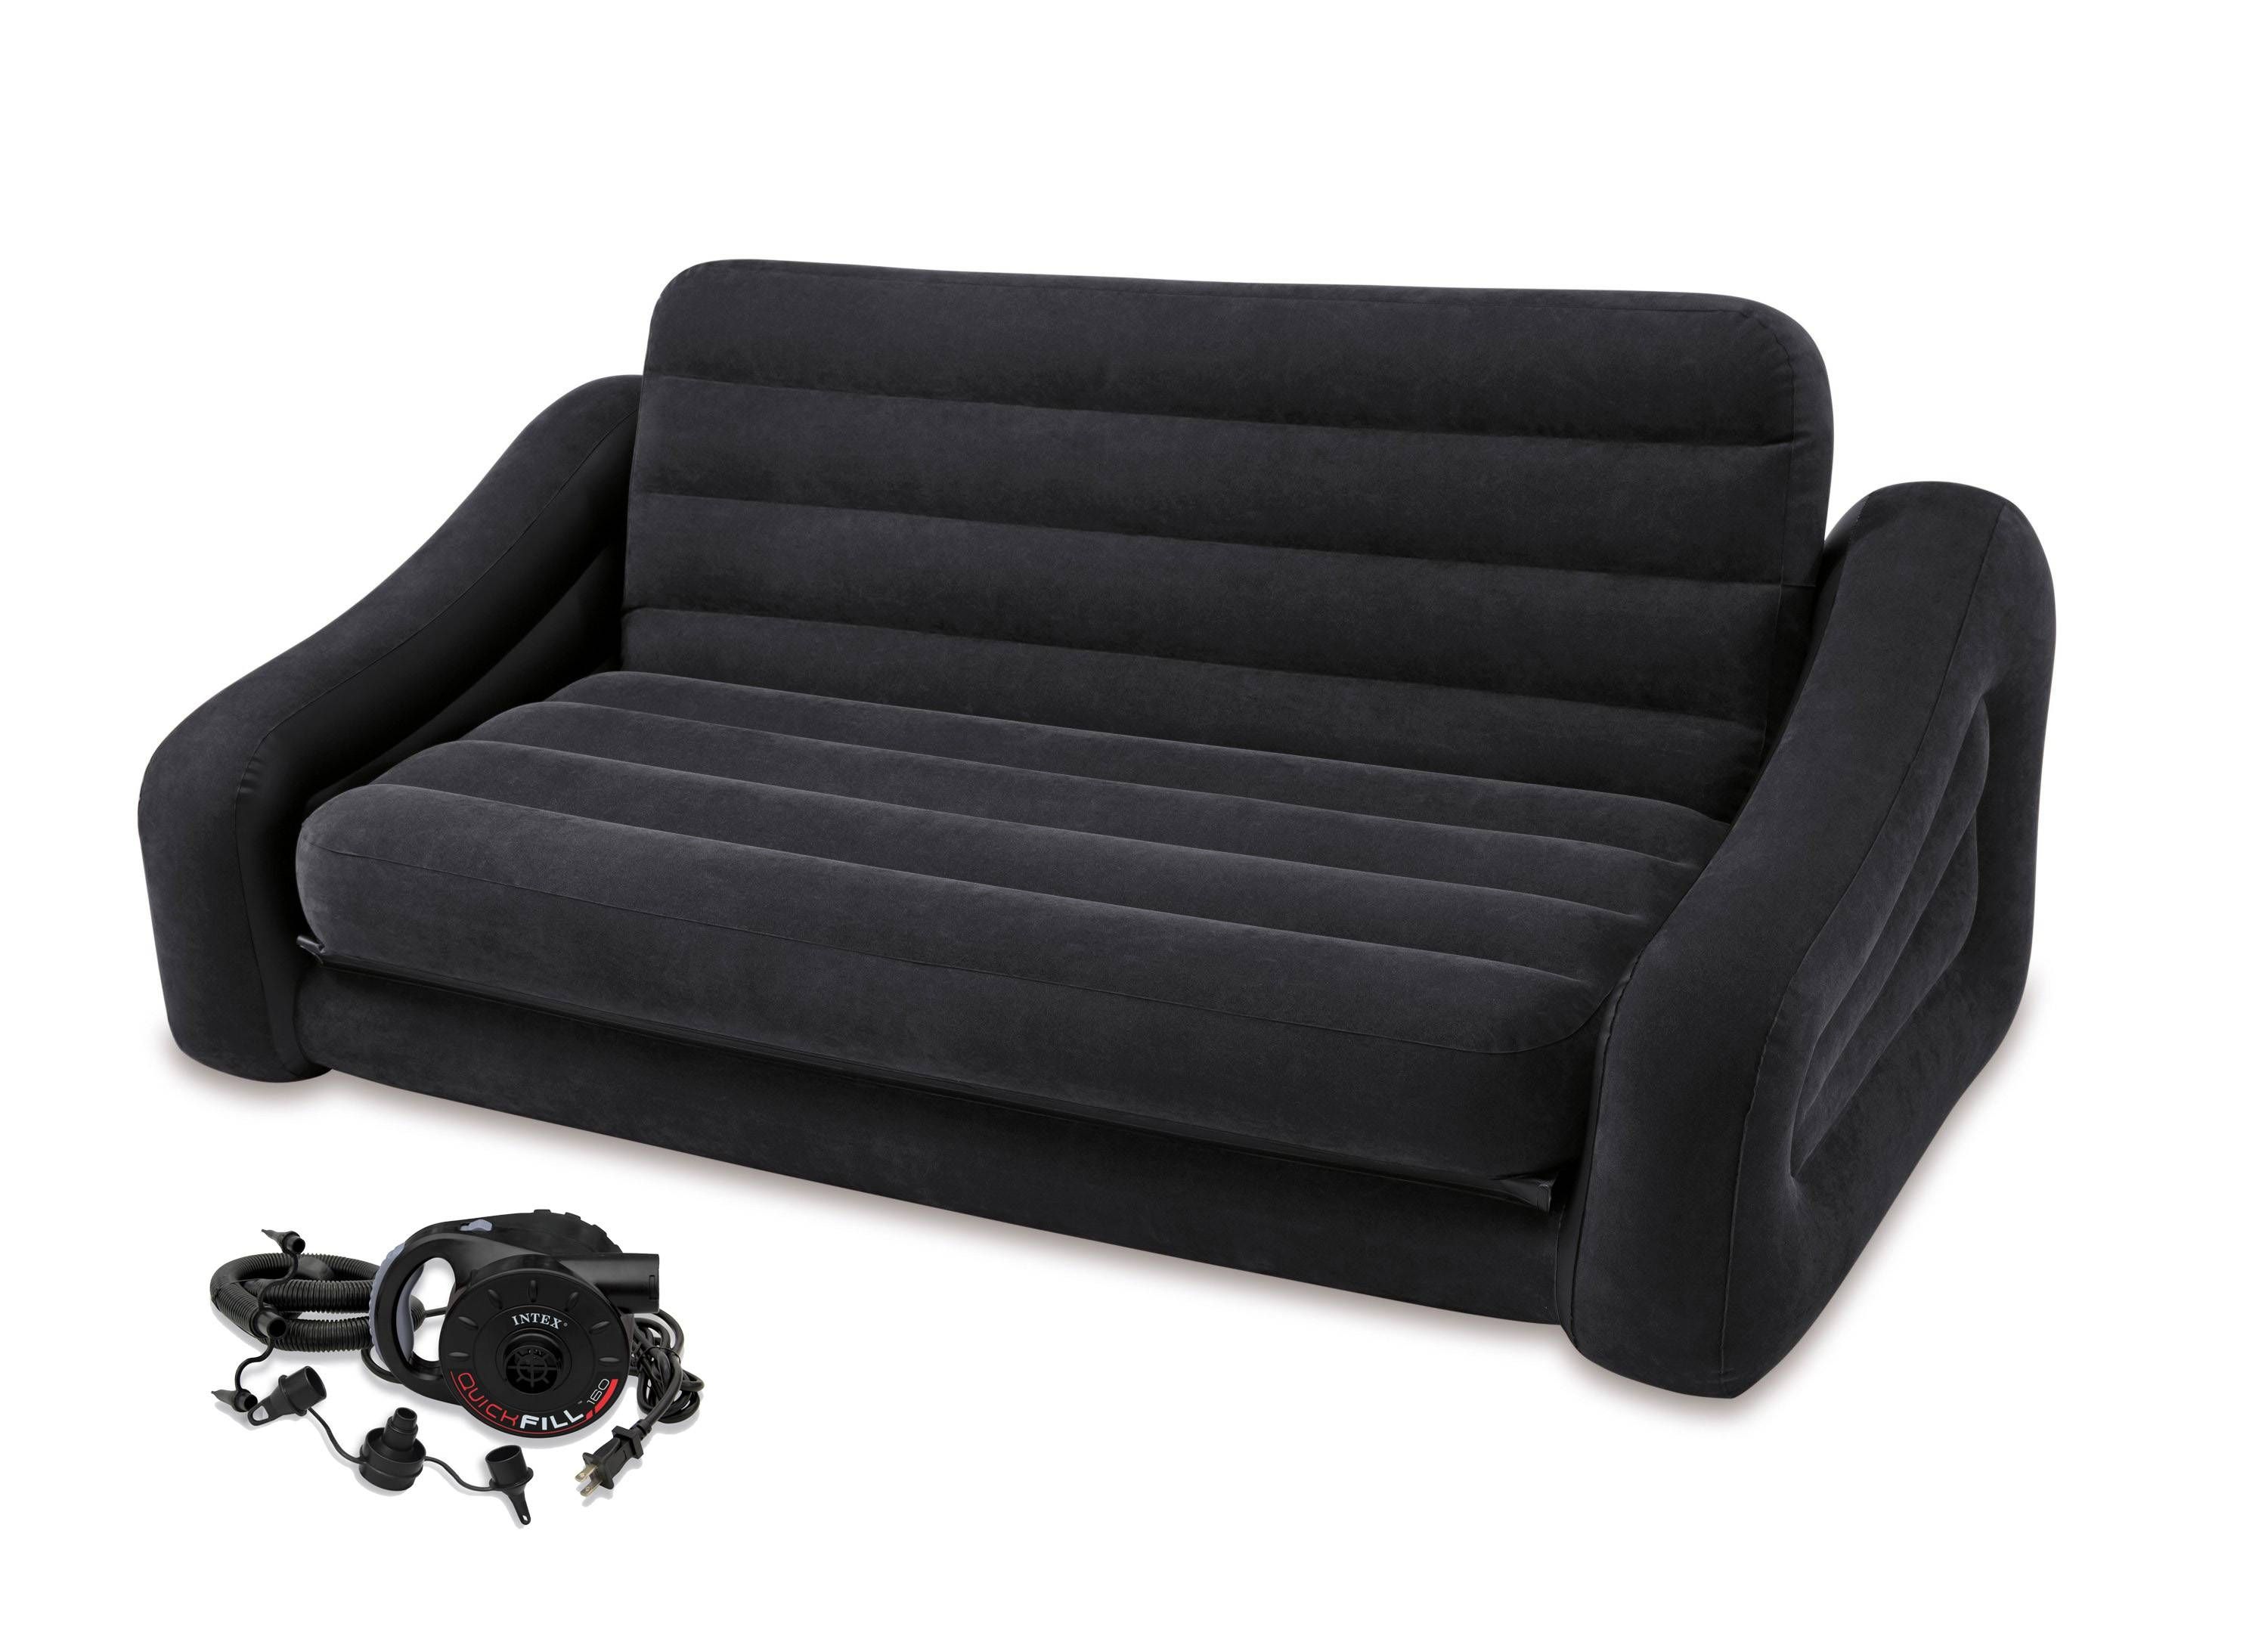 Furniture: Comfort Inflatable Furniture Walmart For Your Relaxing Throughout Sofa Bed Chairs (View 17 of 30)